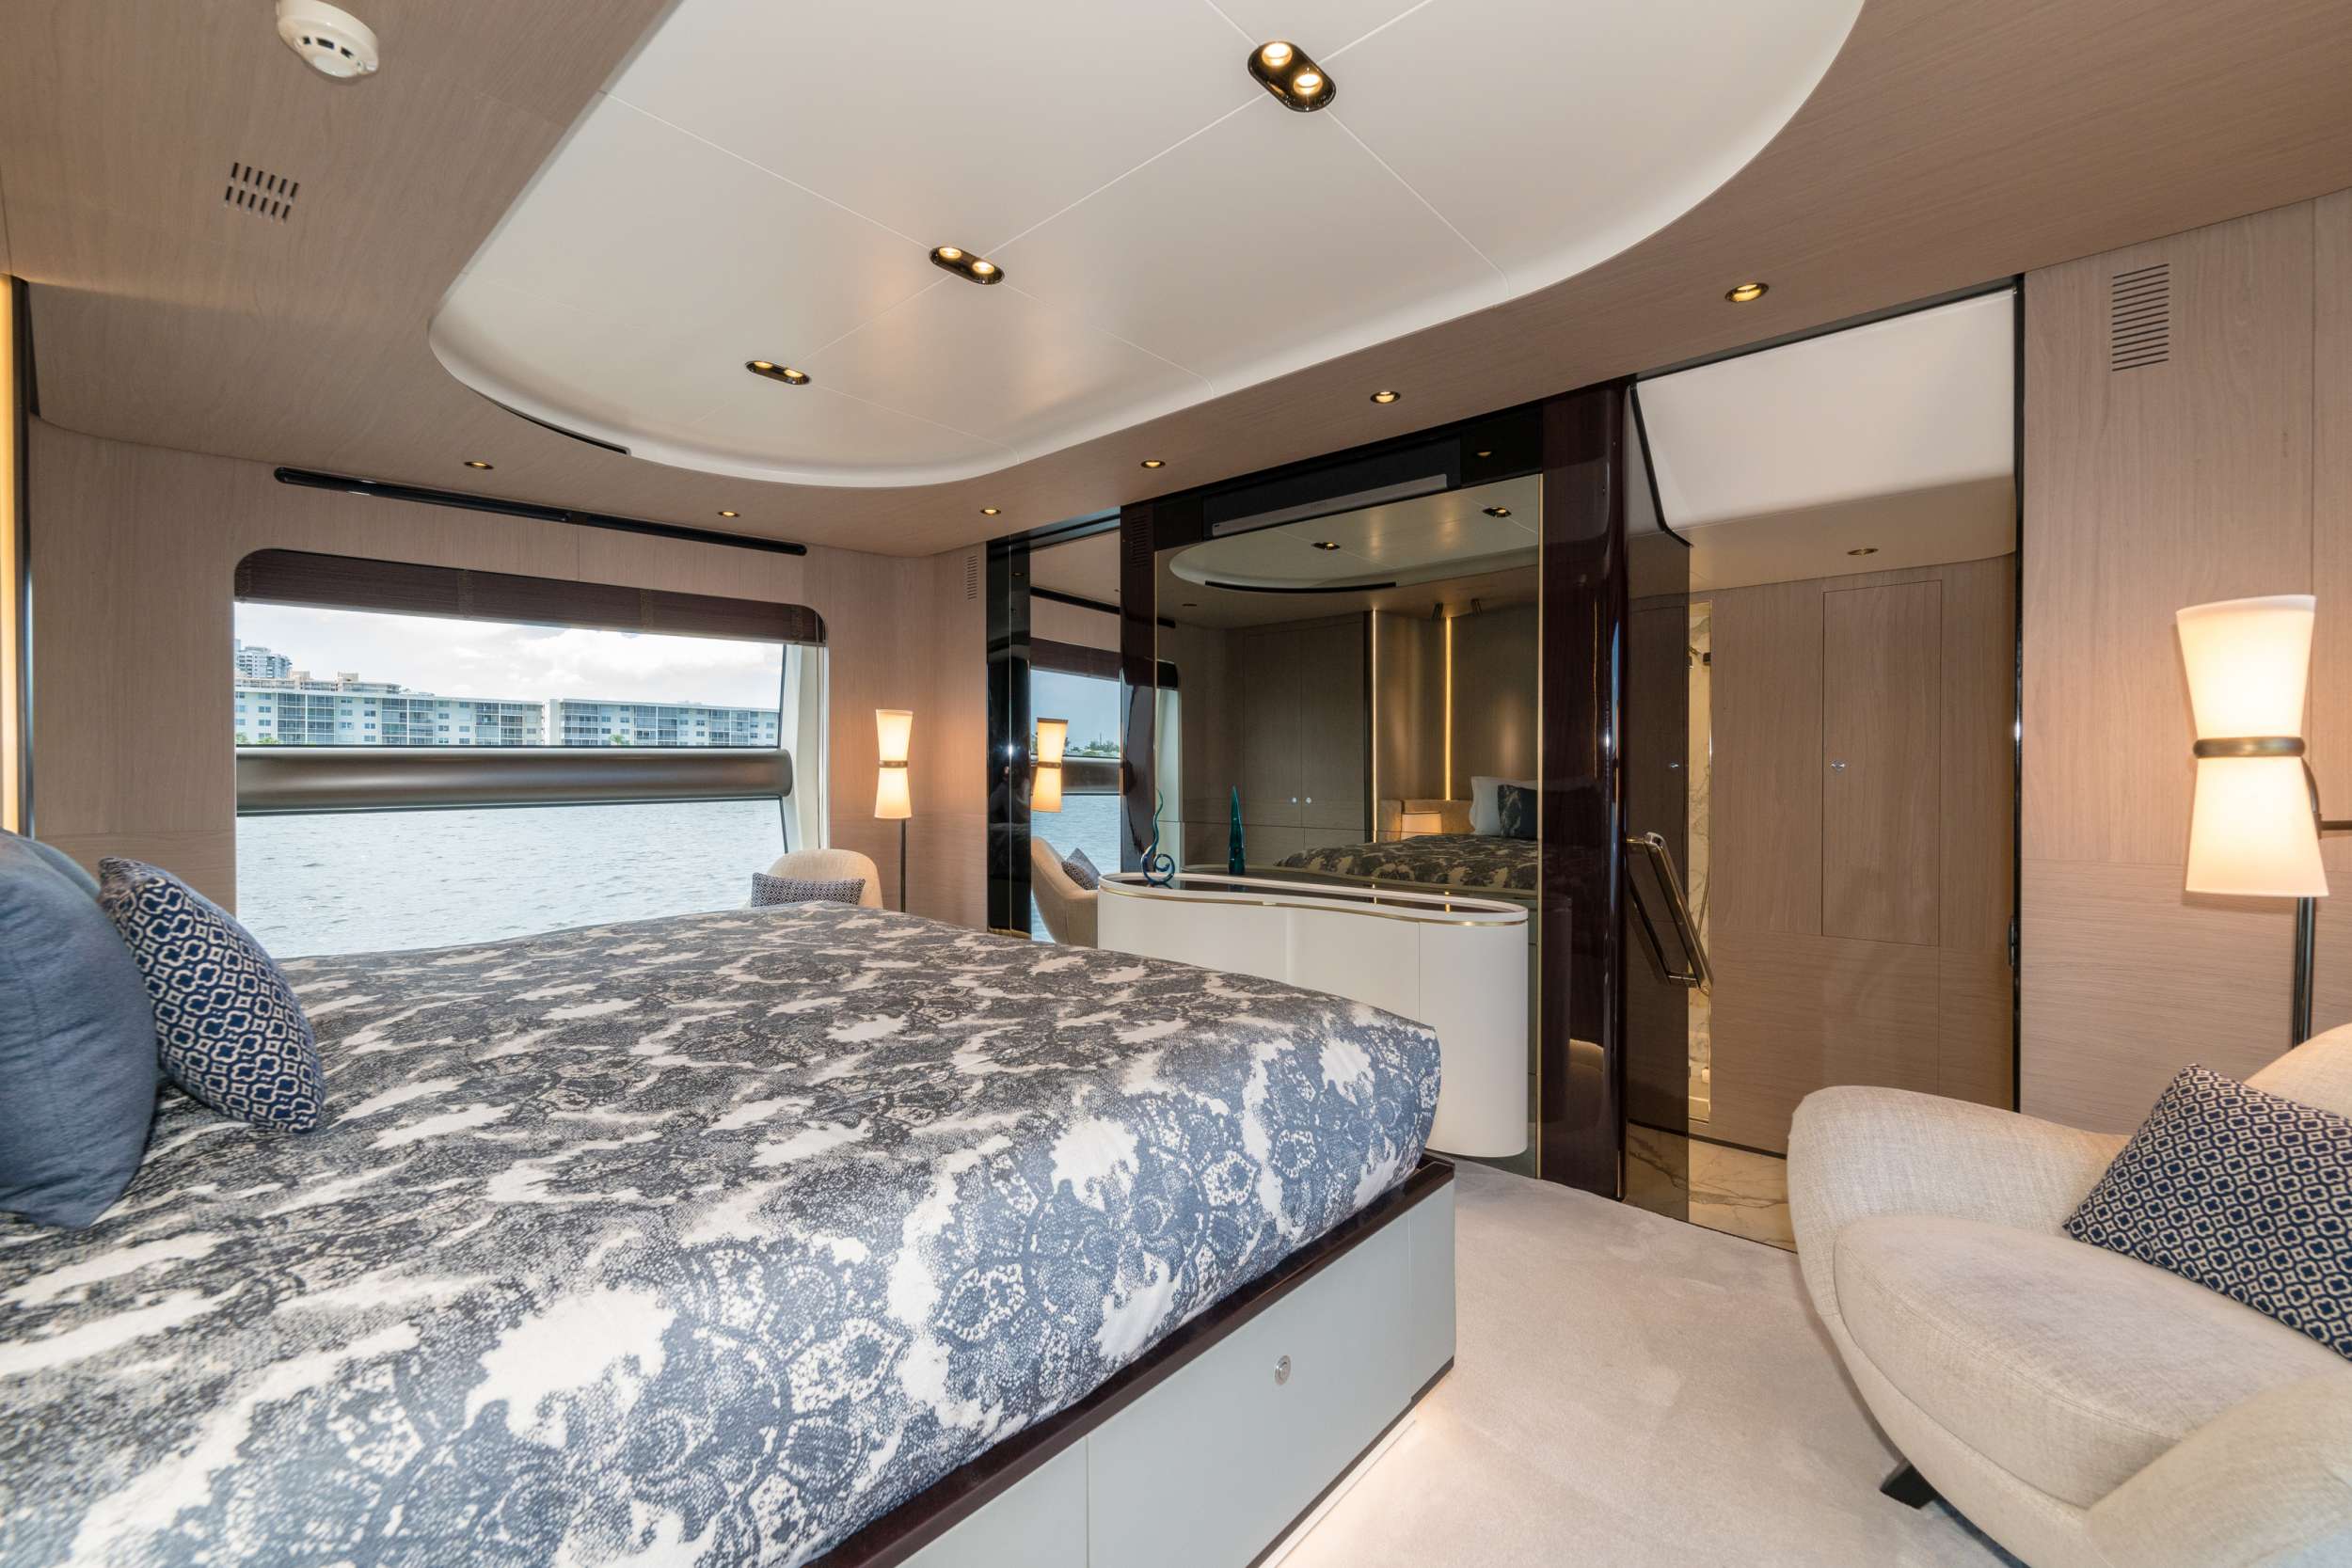 MAJESTIC MOMENTS Yacht Charter - Master stateroom